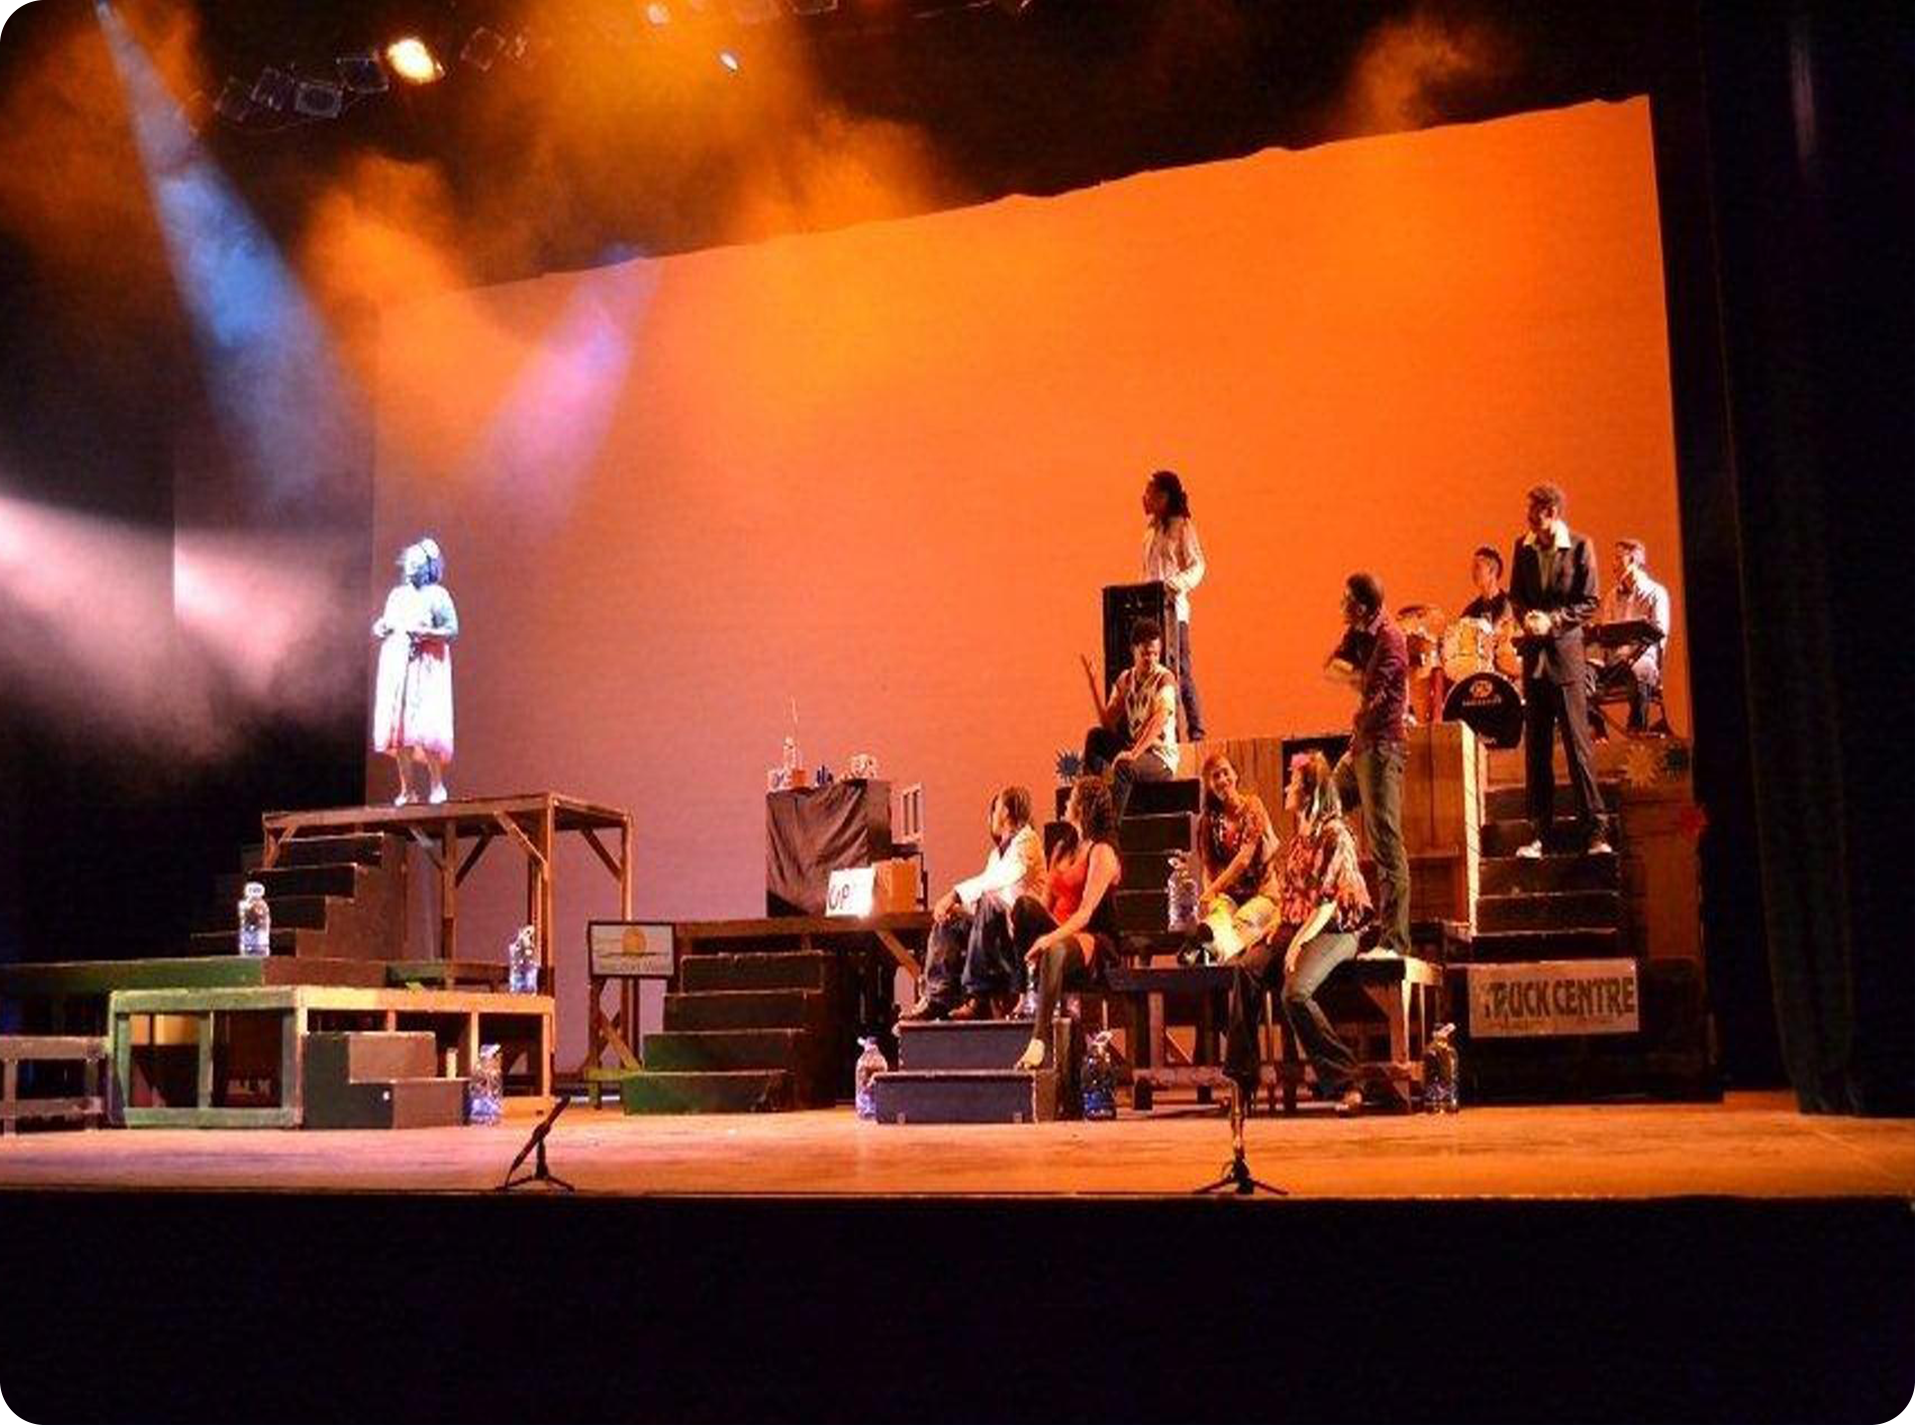 The group of stage performers during a production.